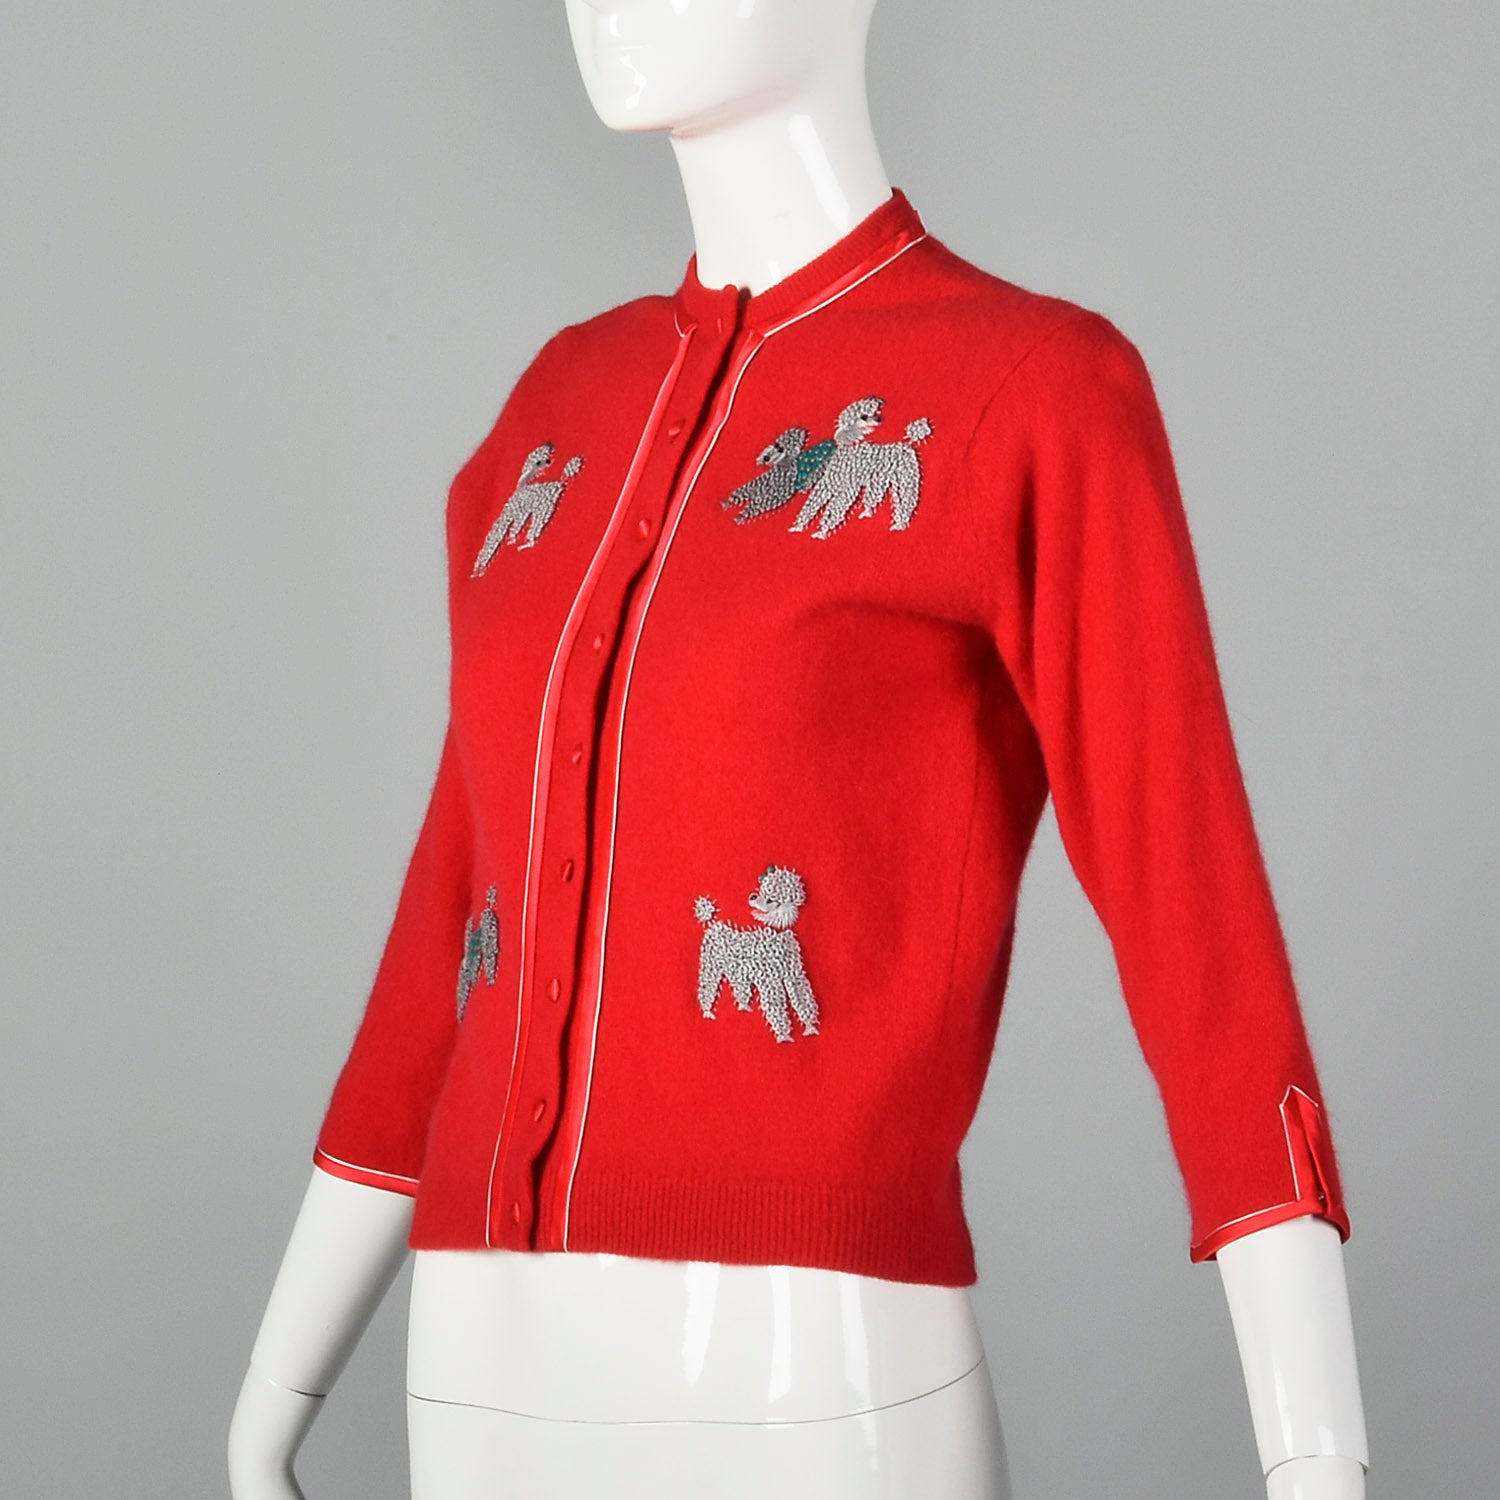 1950s Novelty Poodle Cardigan Sweater Lipstick Red with Satin Trim